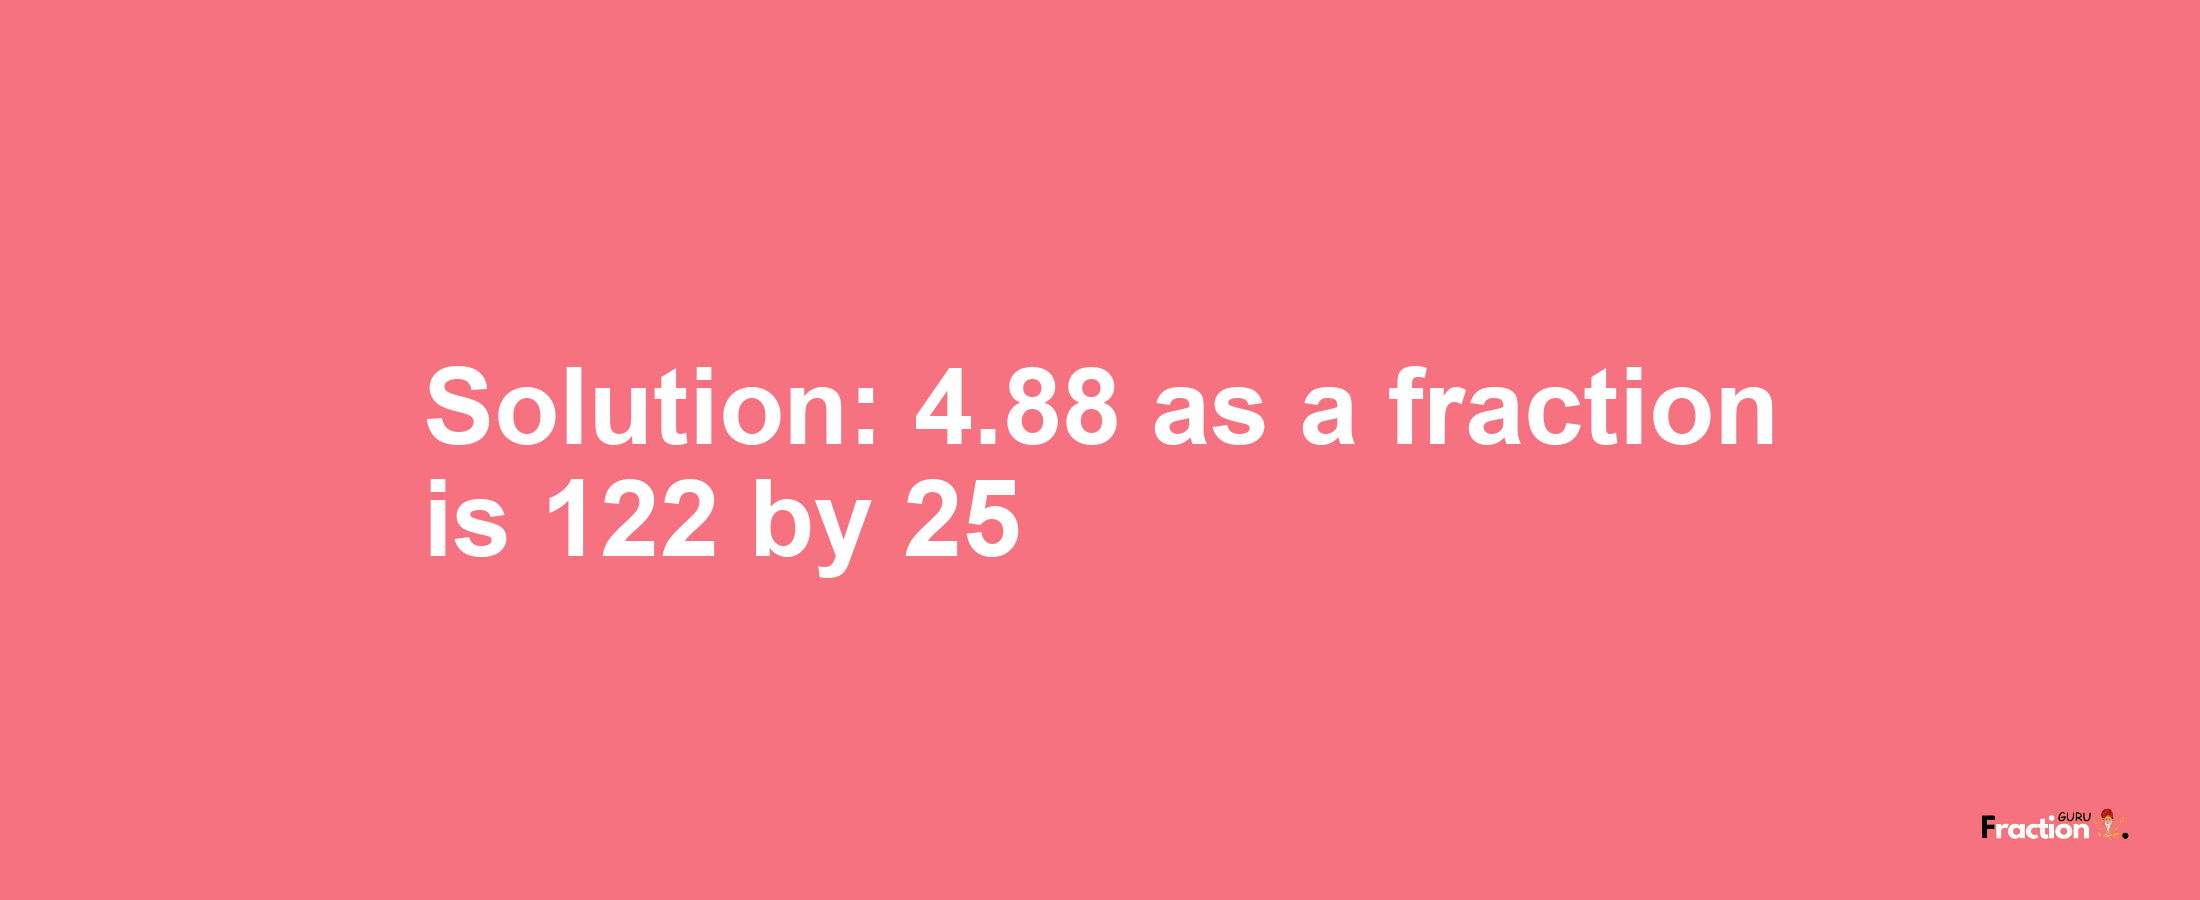 Solution:4.88 as a fraction is 122/25